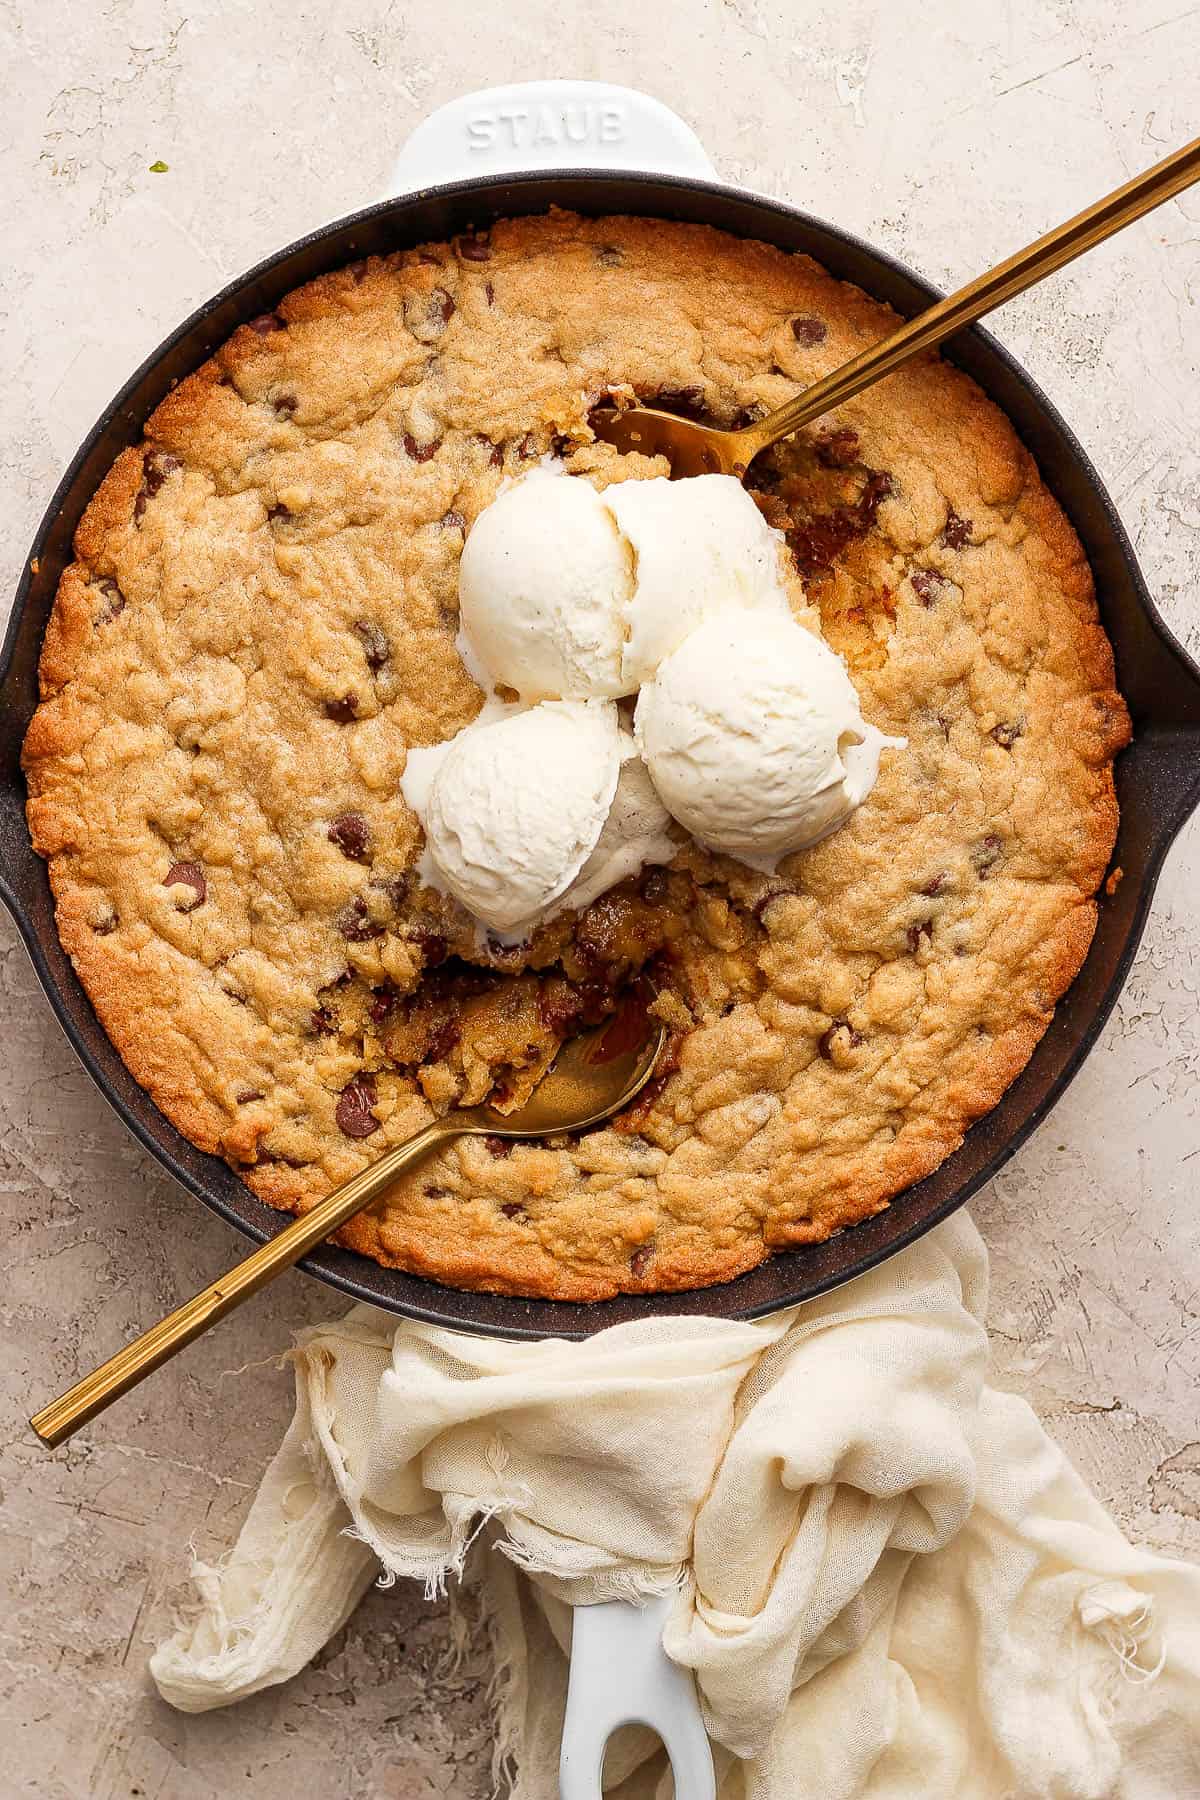 A fully cooked skillet cookie with ice cream on top.